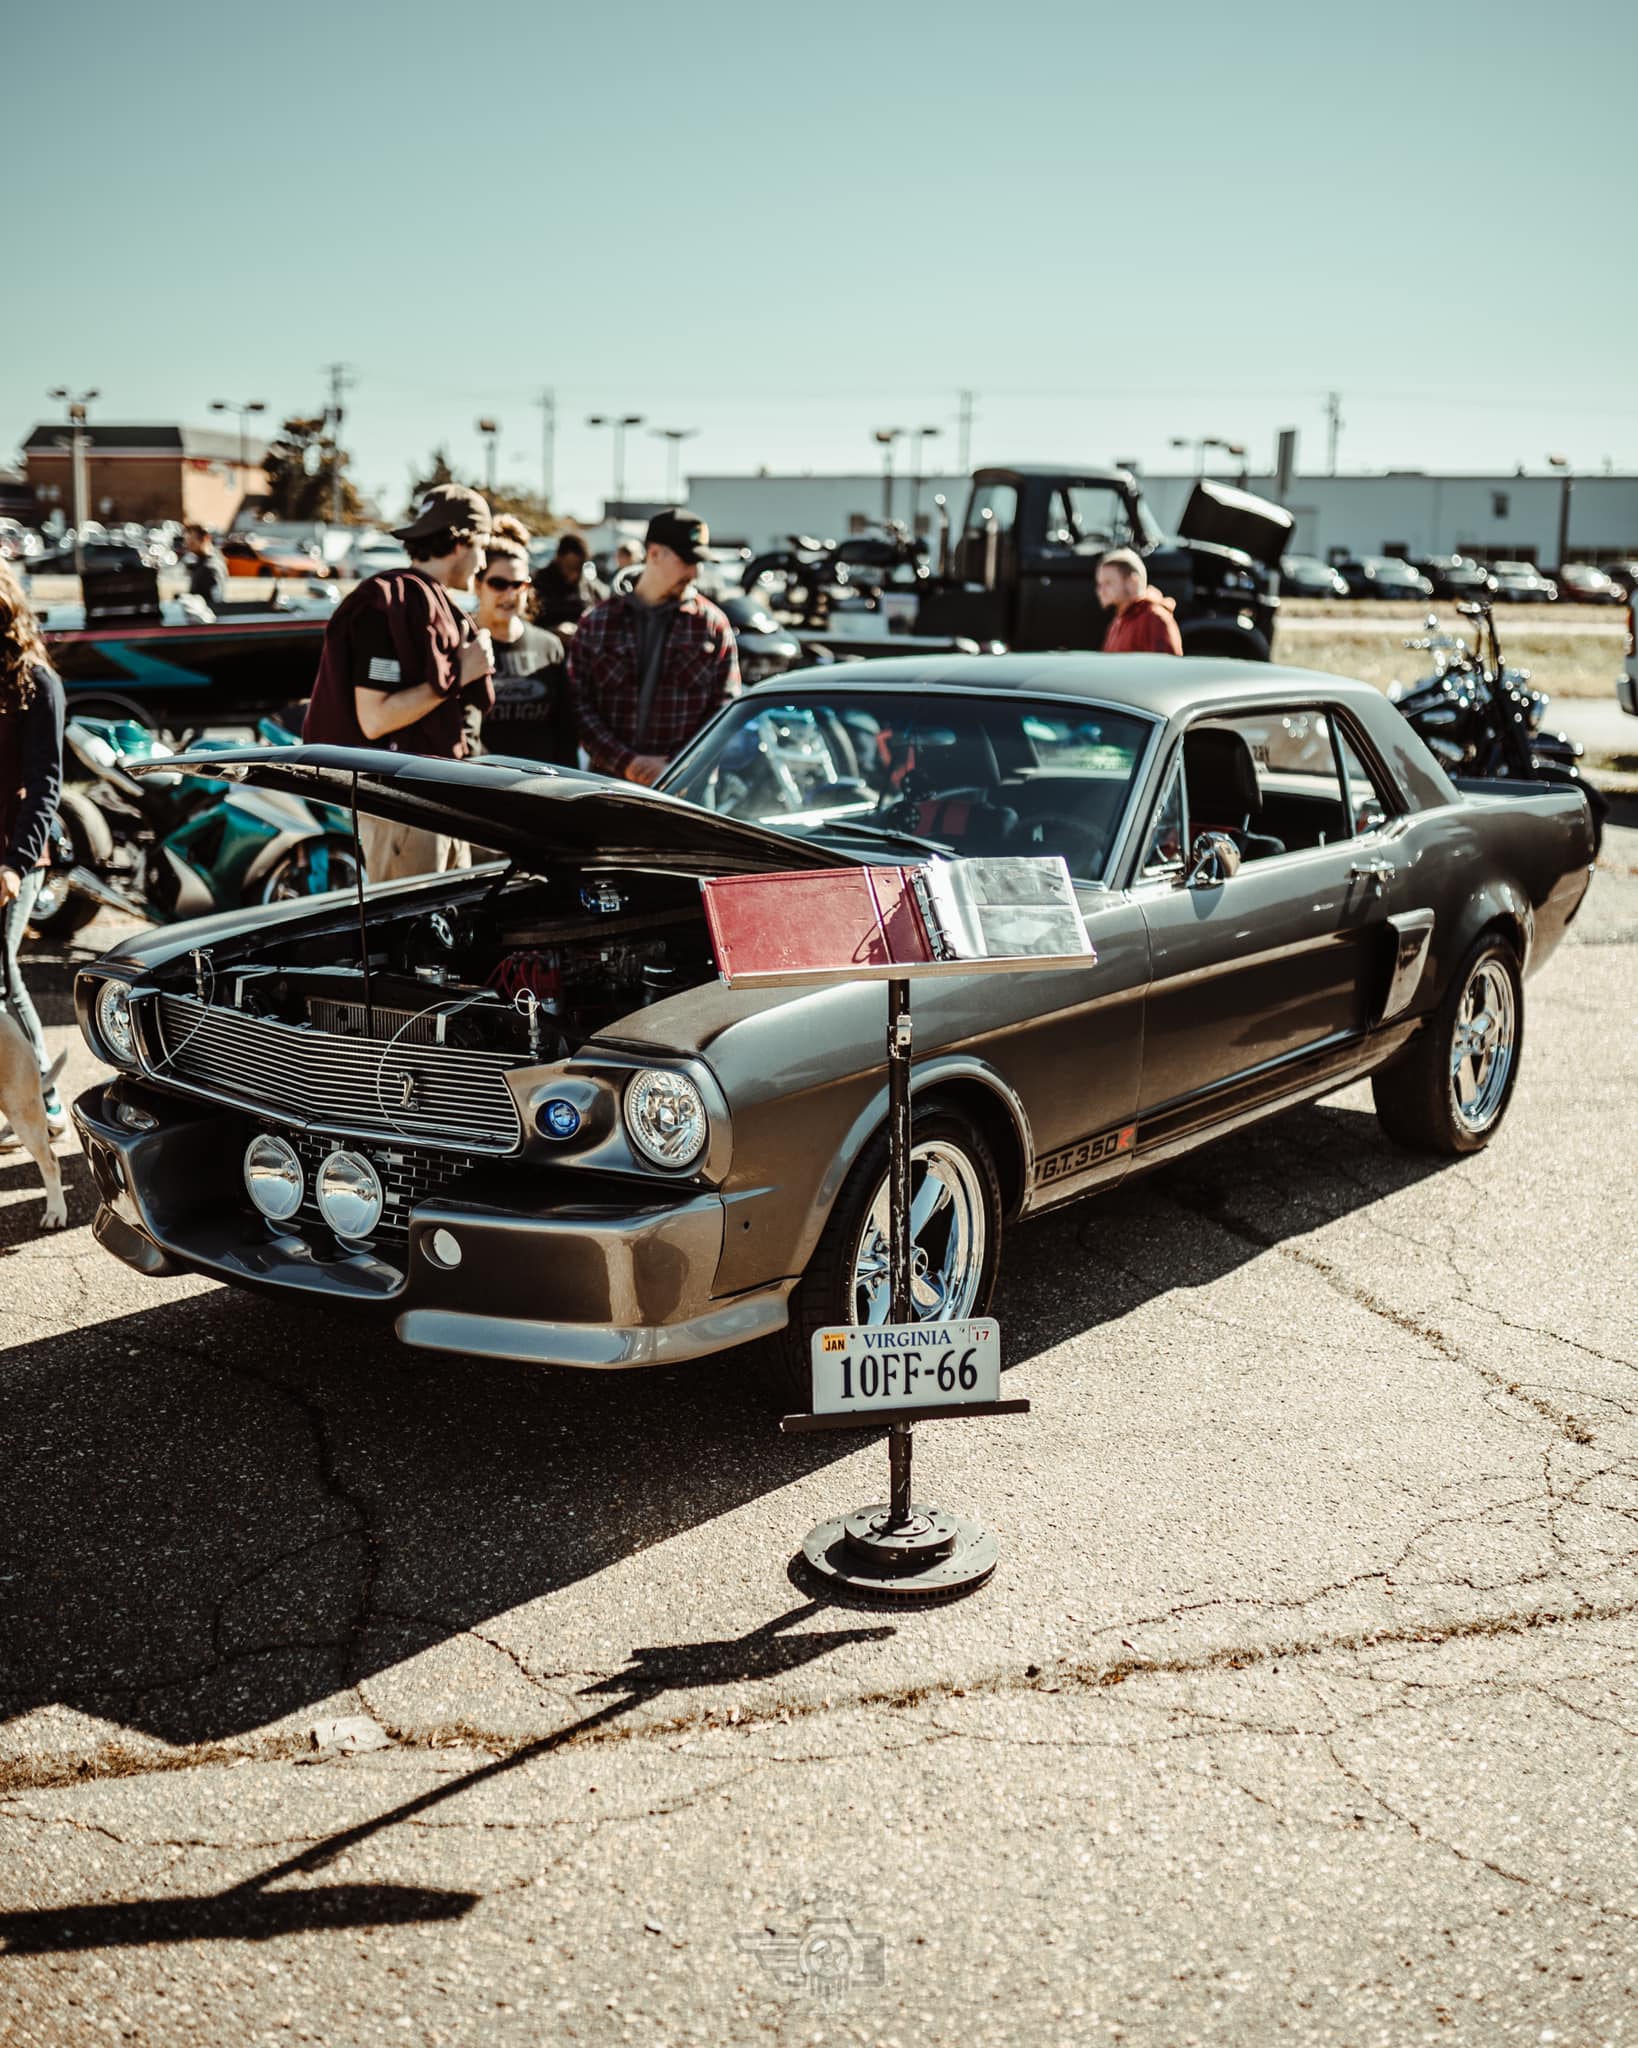 5th Annual 65 Roses Car Show benefiting Cystic Fibrosis